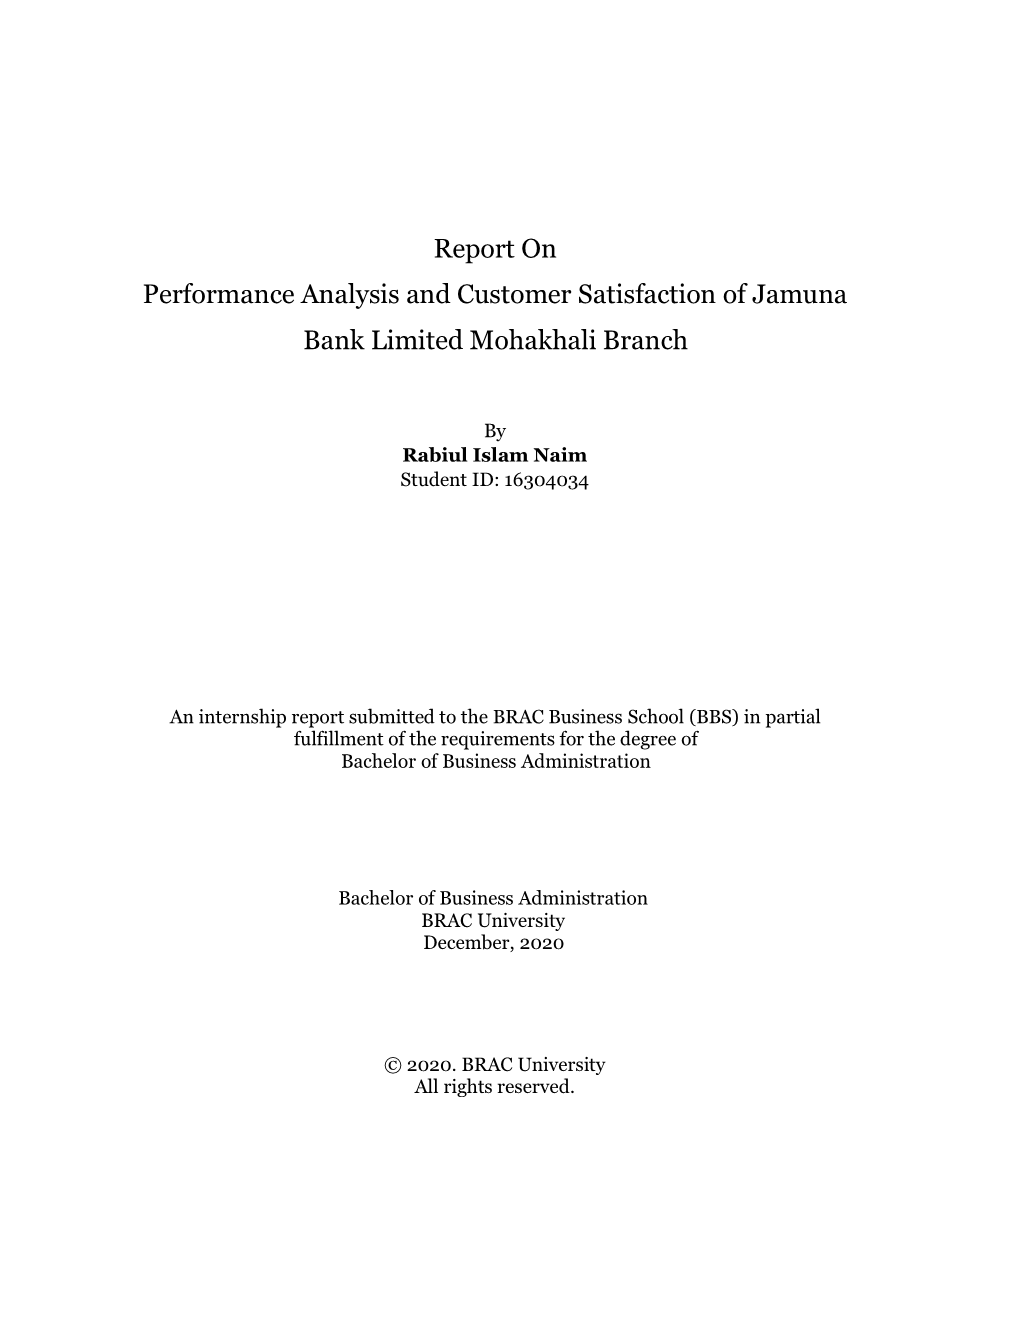 Report on Performance Analysis and Customer Satisfaction of Jamuna Bank Limited Mohakhali Branch